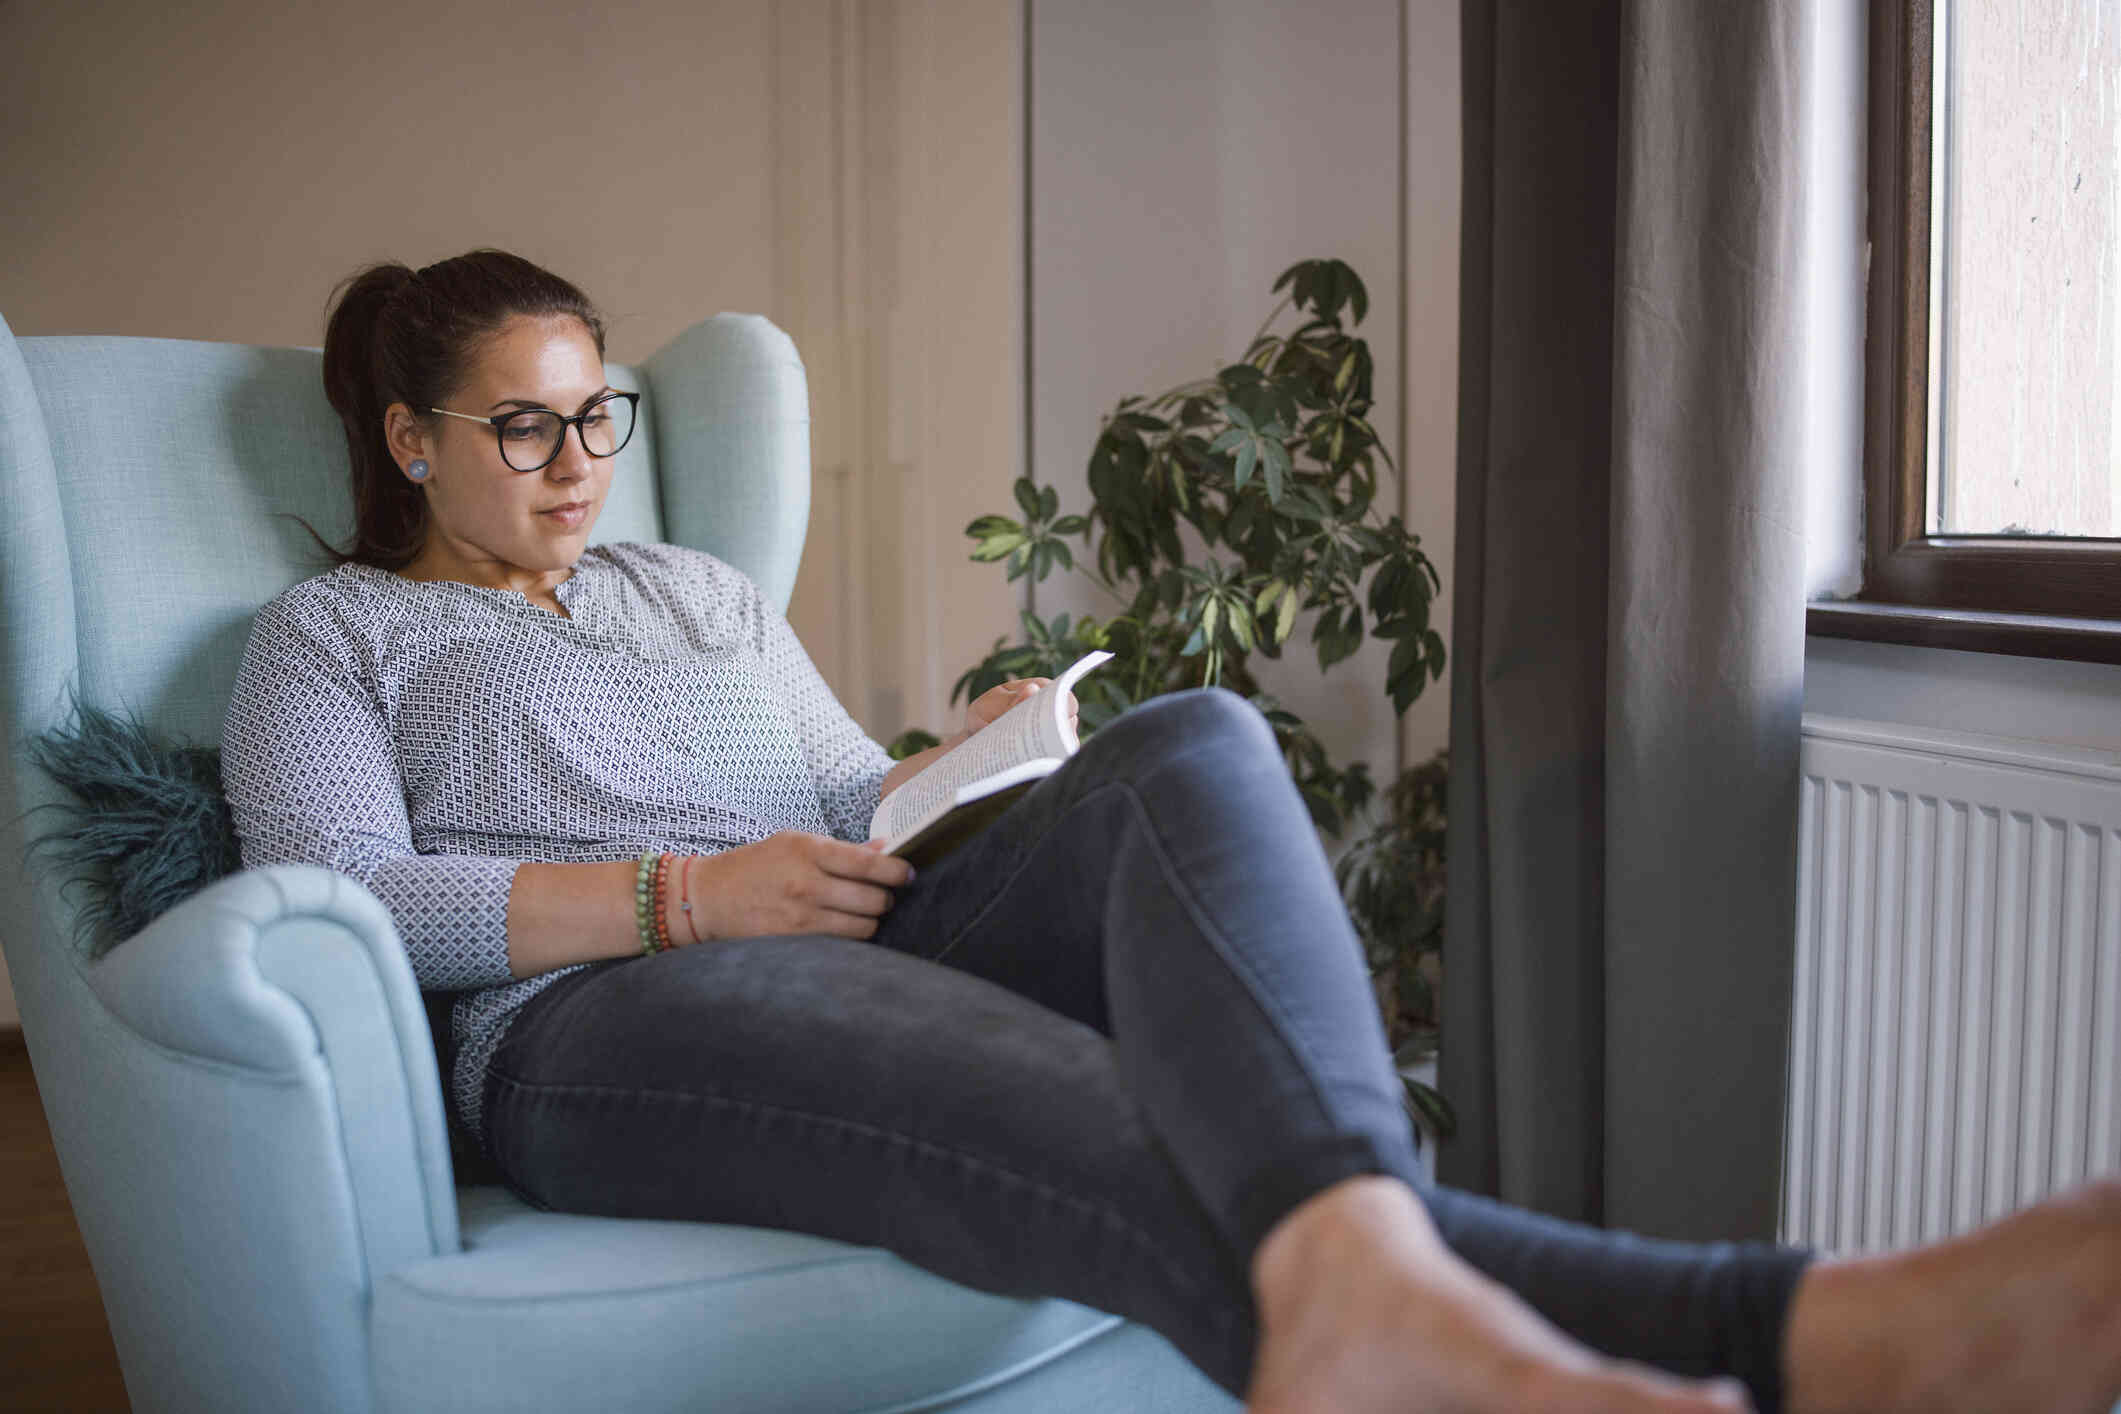 A woman with glasses sits in a blue armchair in her home and reads  from the book in her lap.